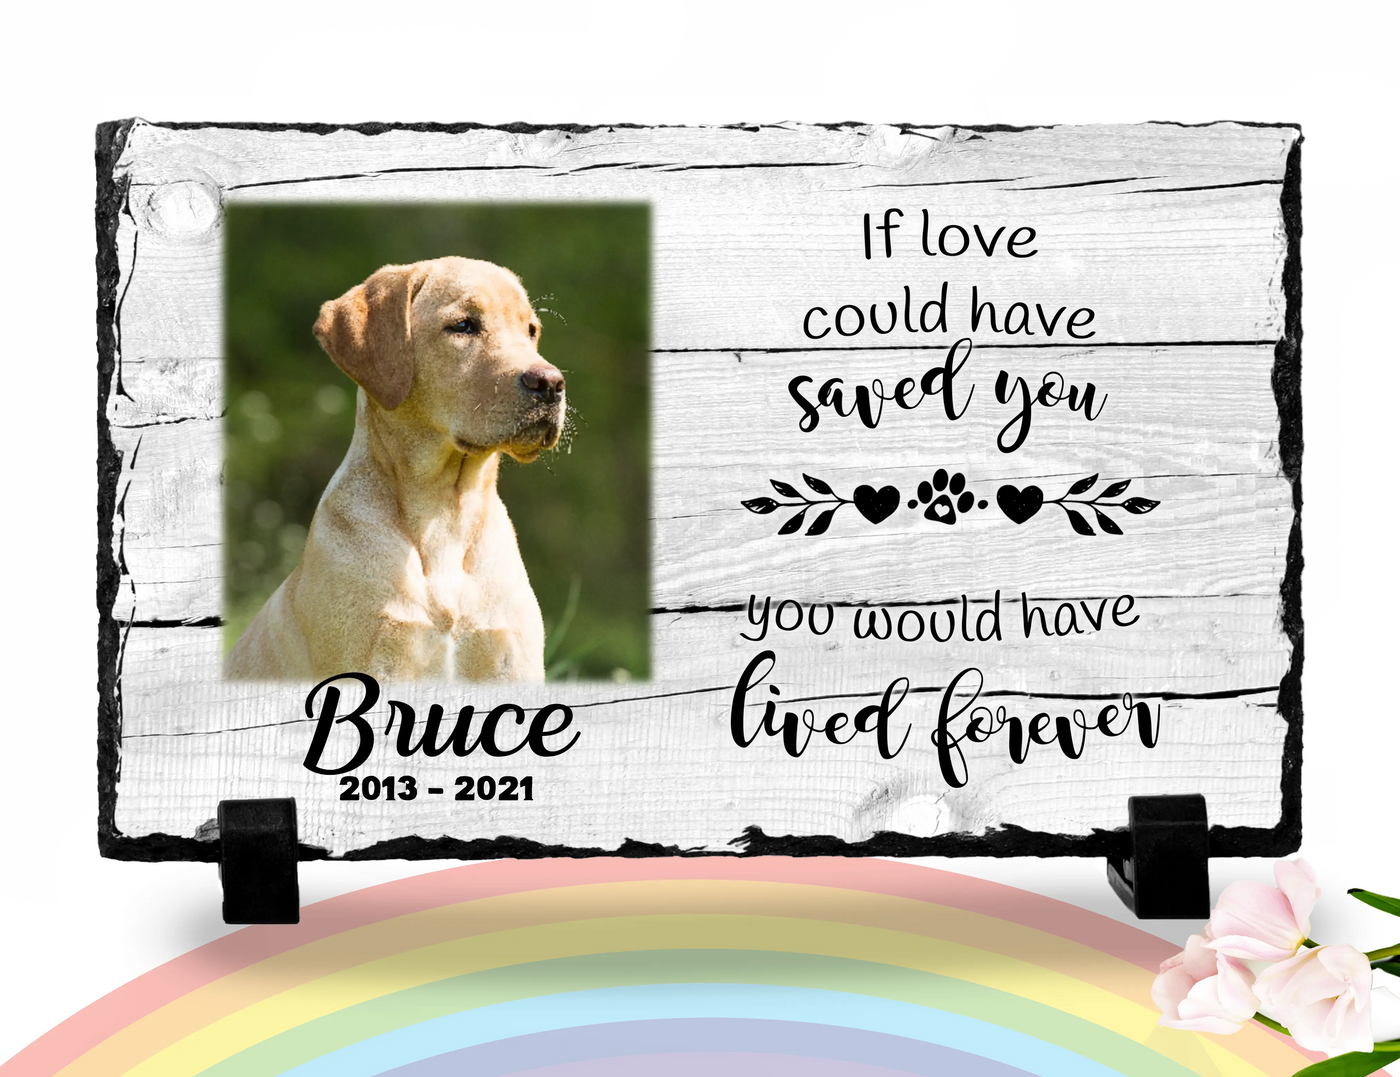 Personalized Dog Memorial   If love alone could have kept you here  Personalized Picture Keepsake Memorial Slates